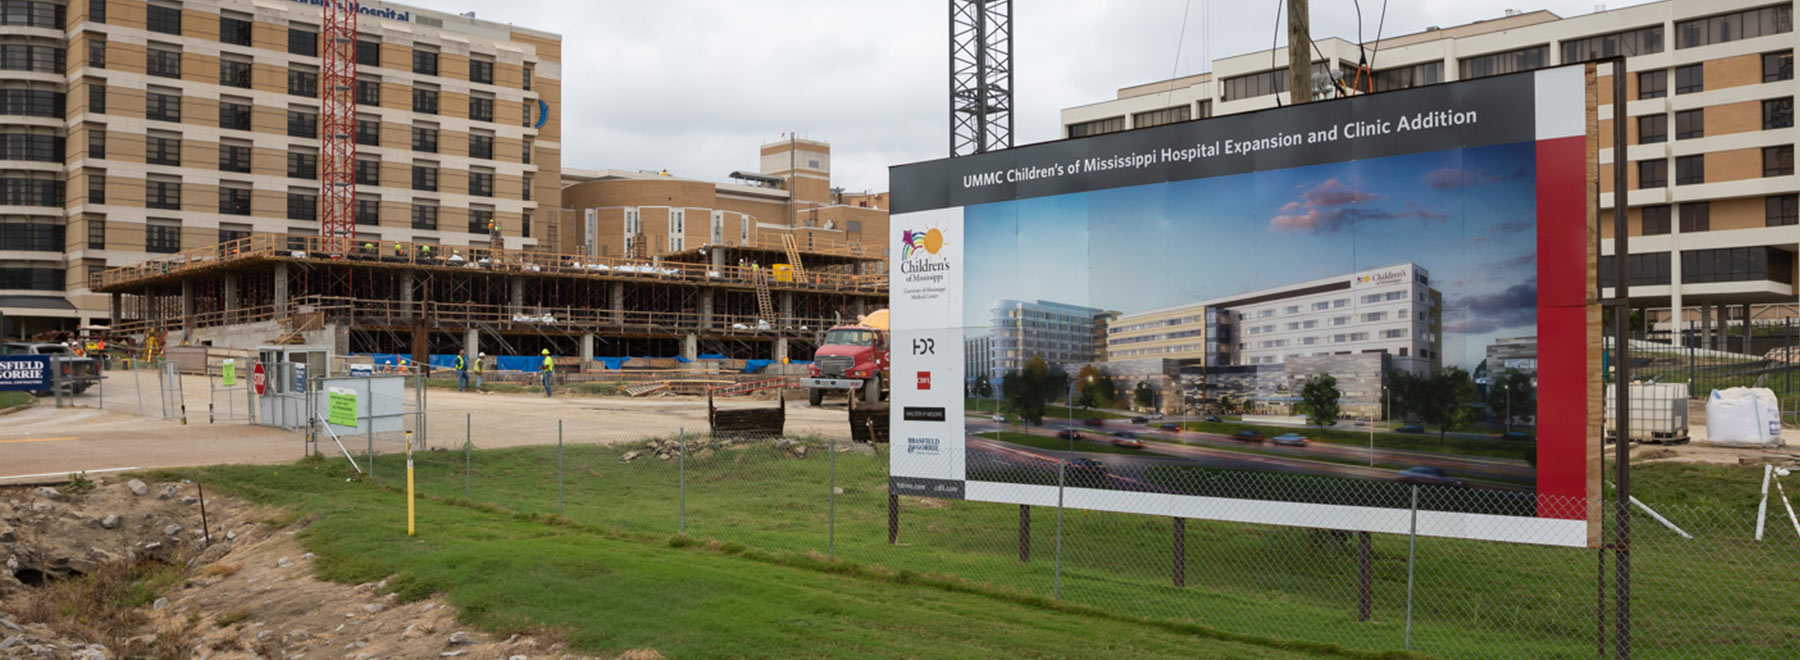 A sign shows how the pediatric expansion at UMMC will look when finished.